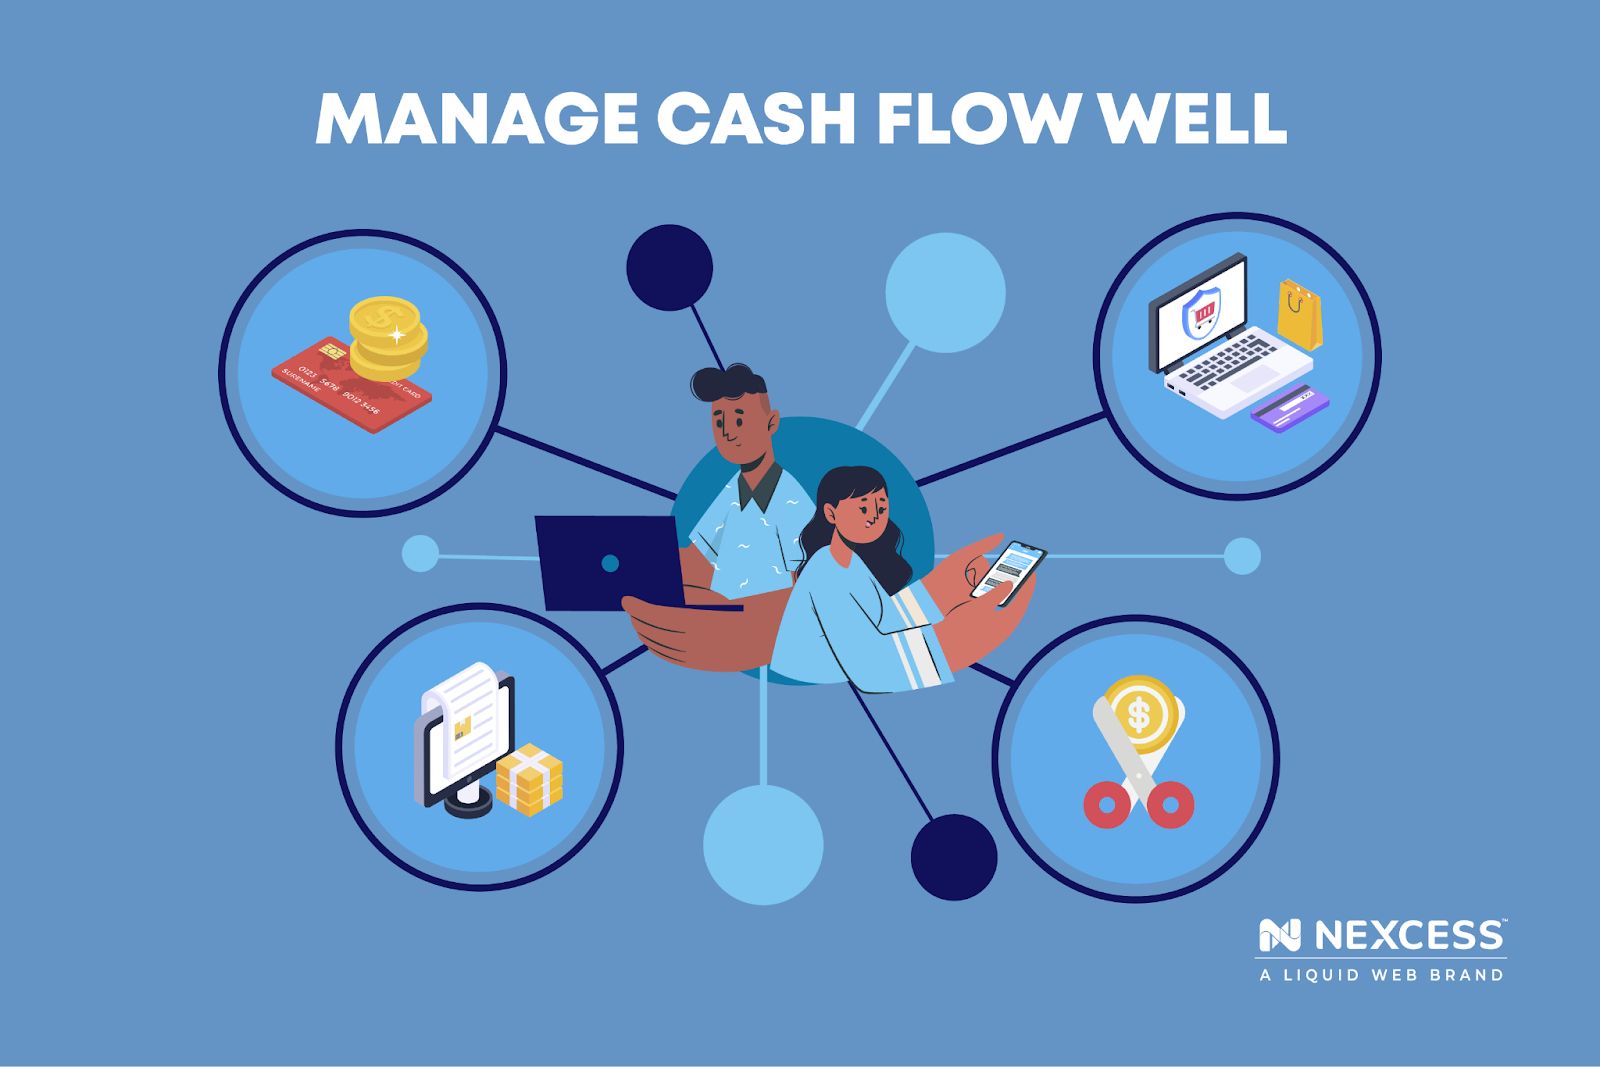 Managing cash flow well is key to tackling inflation.